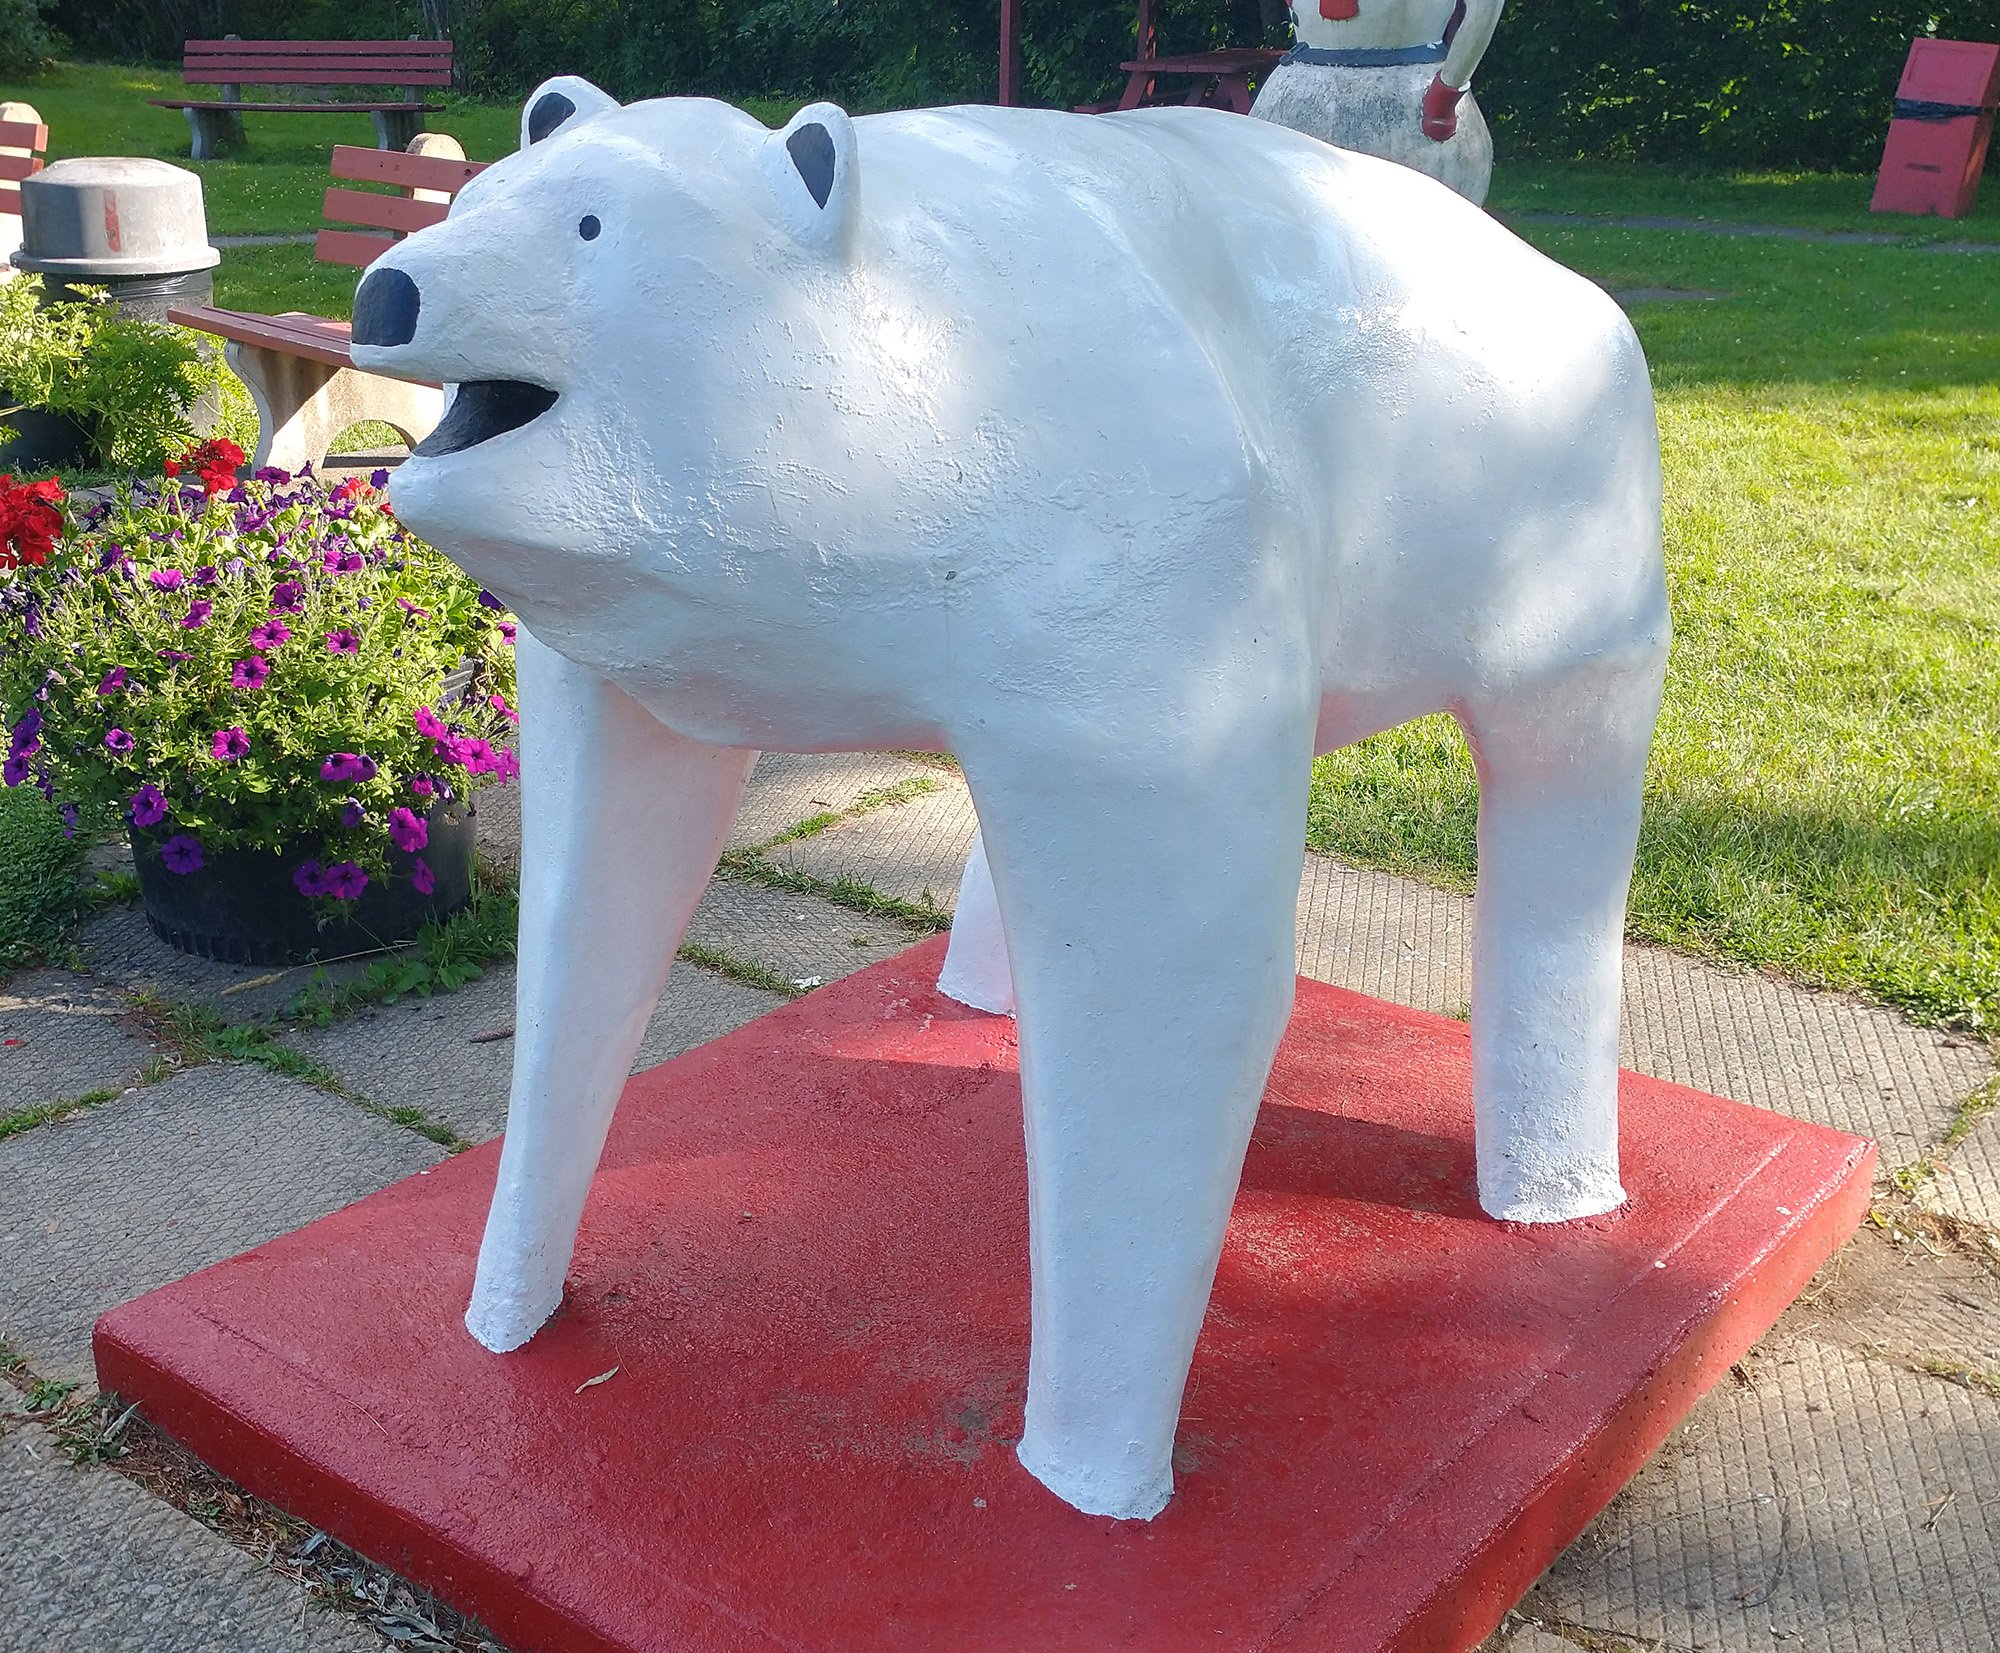 This awesome bear statue at an Ice Cream shop. God bless whoever made this. Thank you.